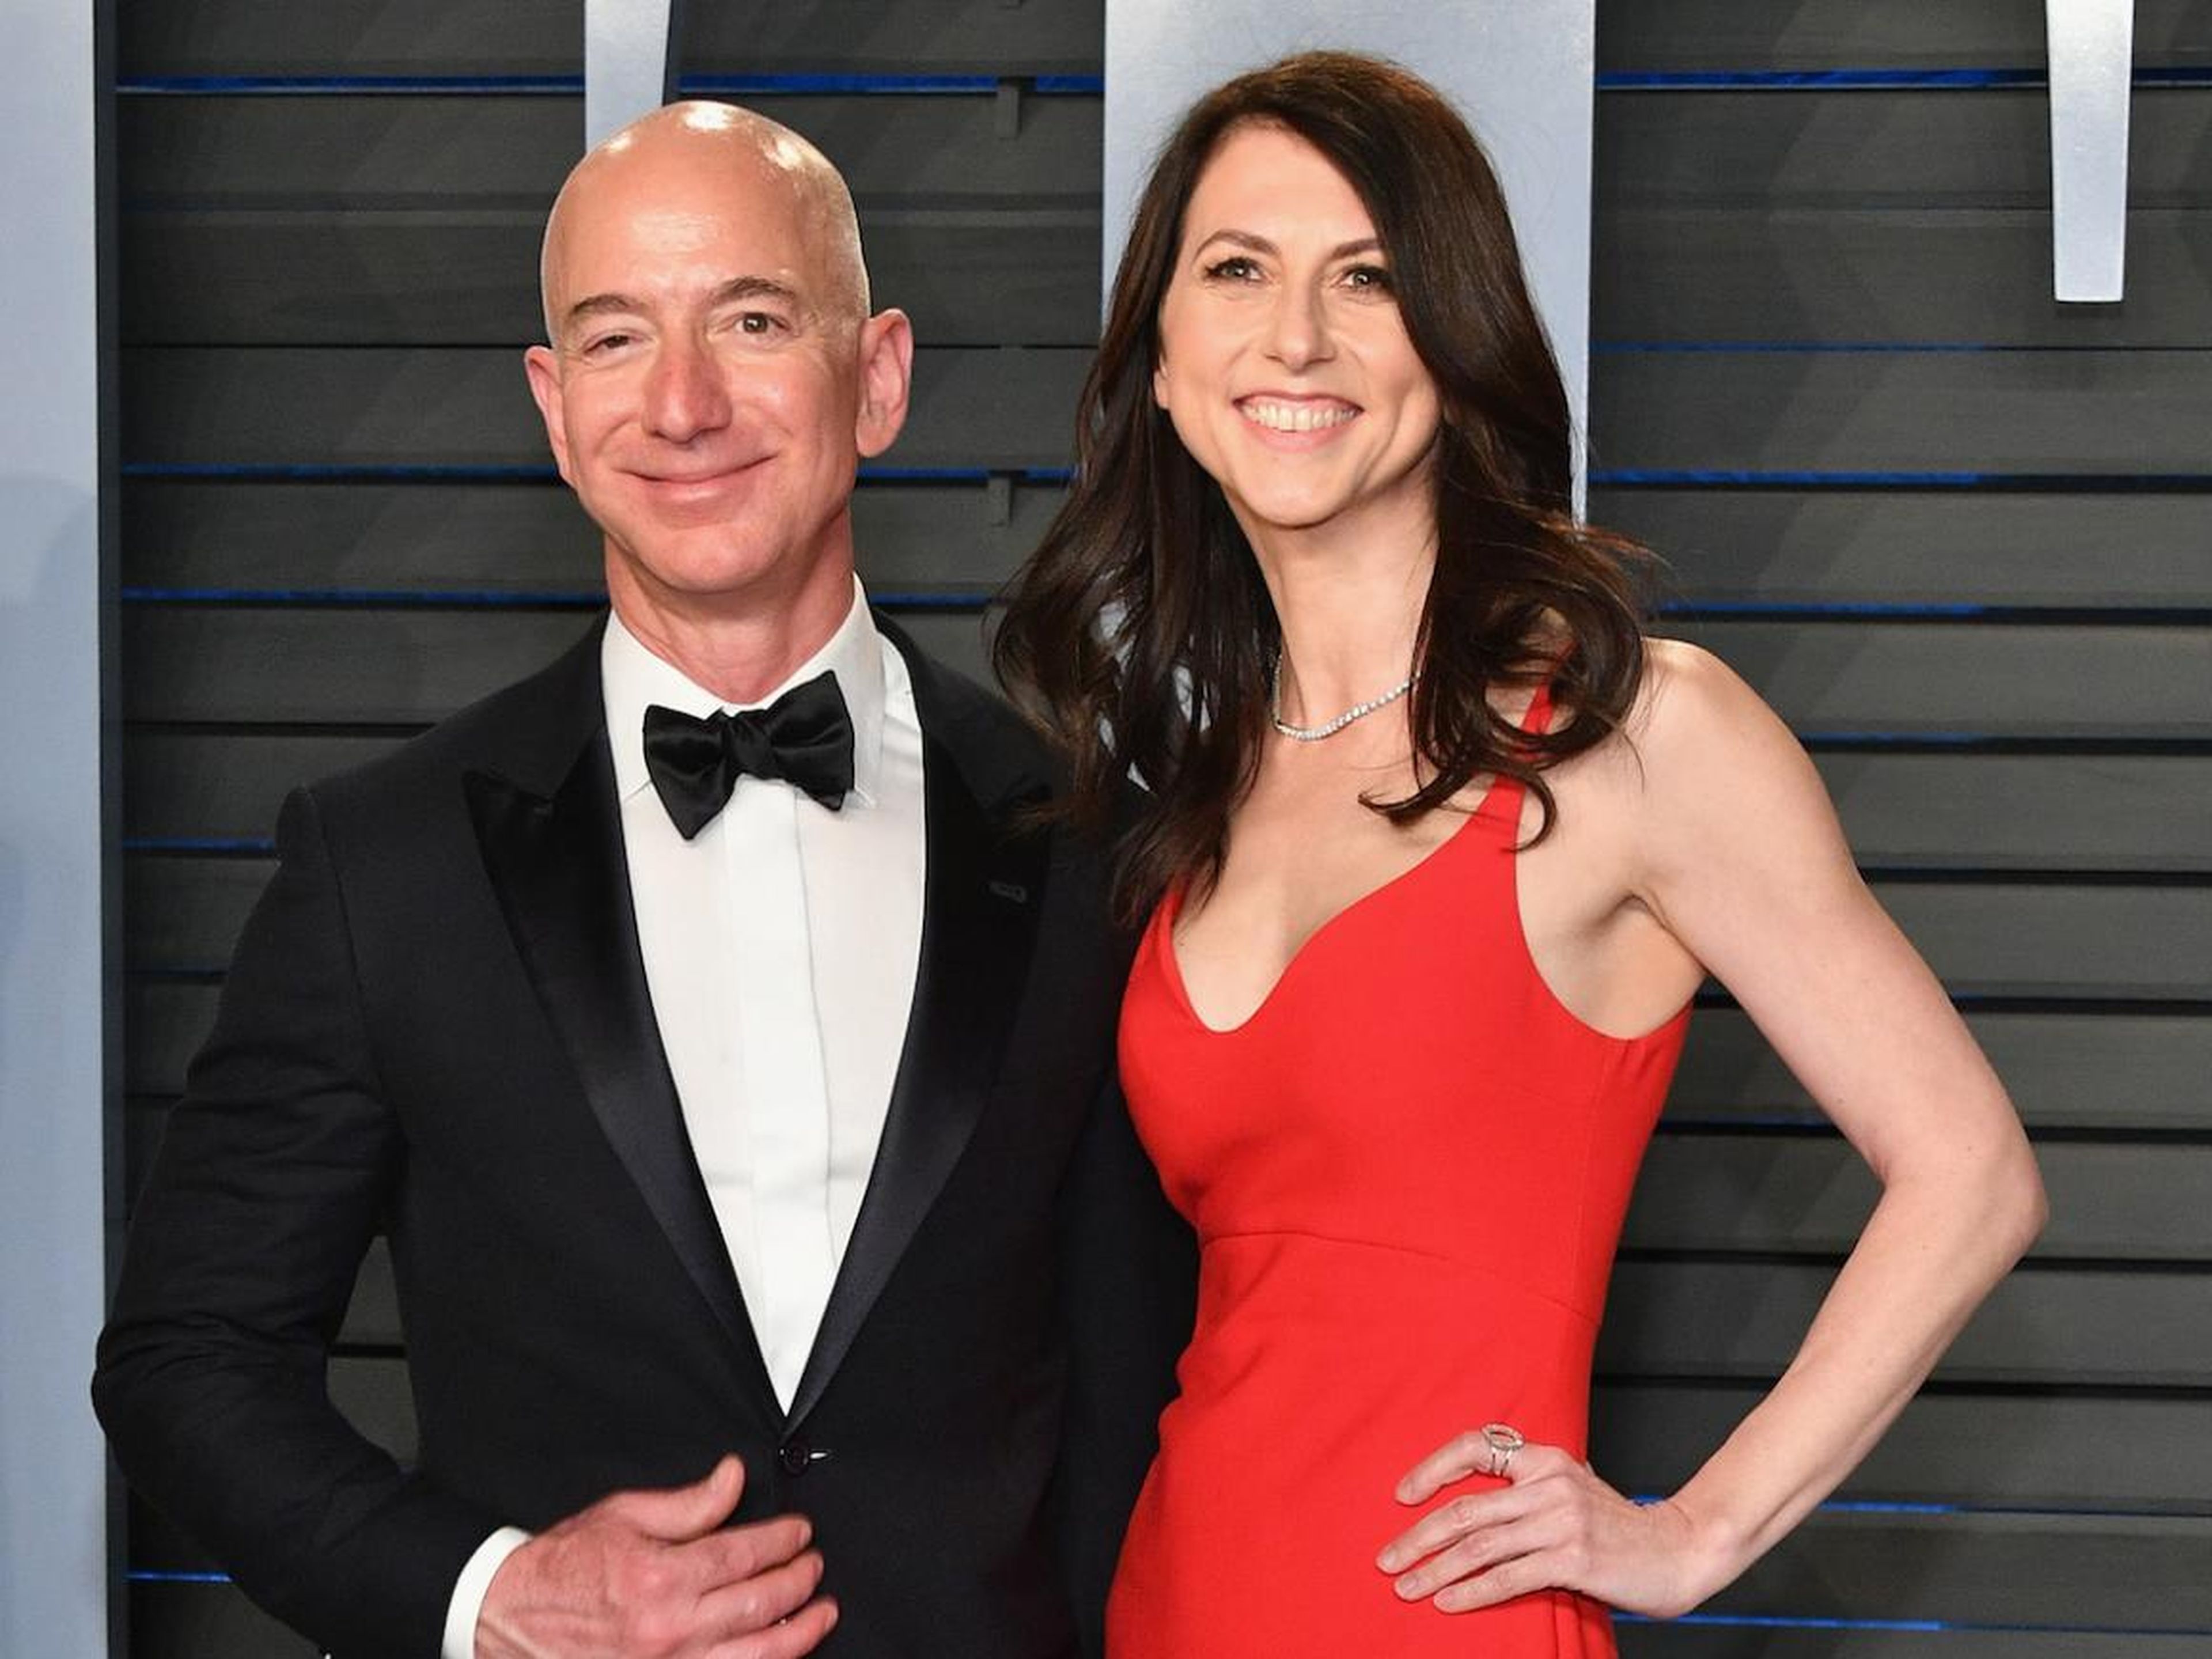 Amazon CEO Jeff Bezos has said he avoids early-morning meetings so that he has time to eat a healthy "leisurely" breakfast without any "fatty convenience foods." He's said he uses the extra time to spend mornings with his soon-to